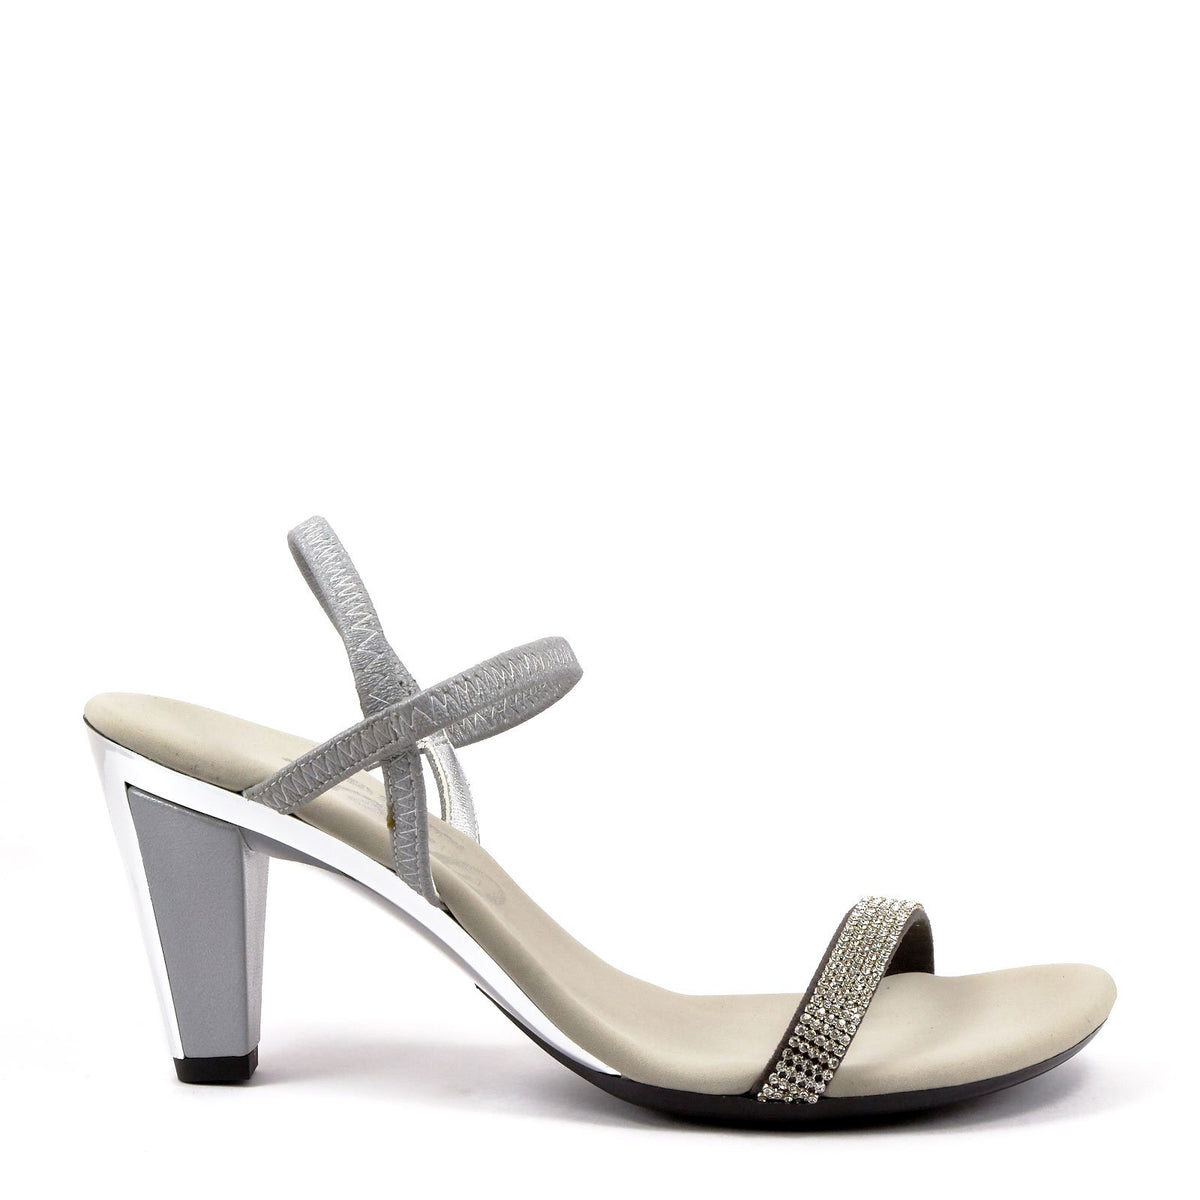 Silver low heel strappy sandals by Onex Shoes